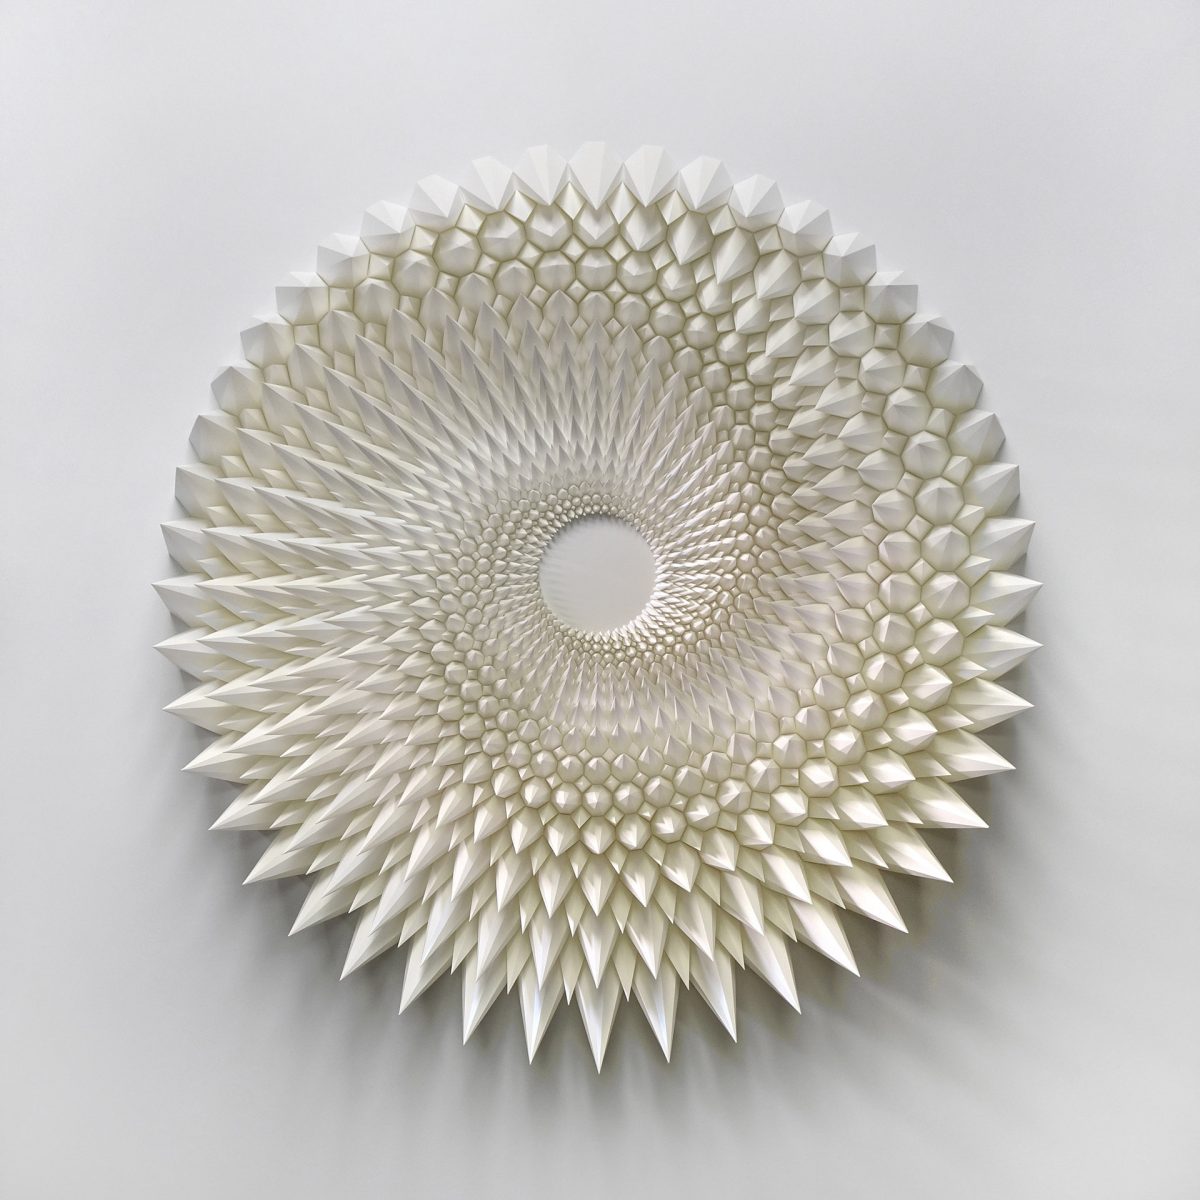 shlian, Unholy 214 Soon My Doubles Will Pull Off All Of My Stunts, 48 x 50 x 4, Iridescent Flash White Paper Contemporary art buy online